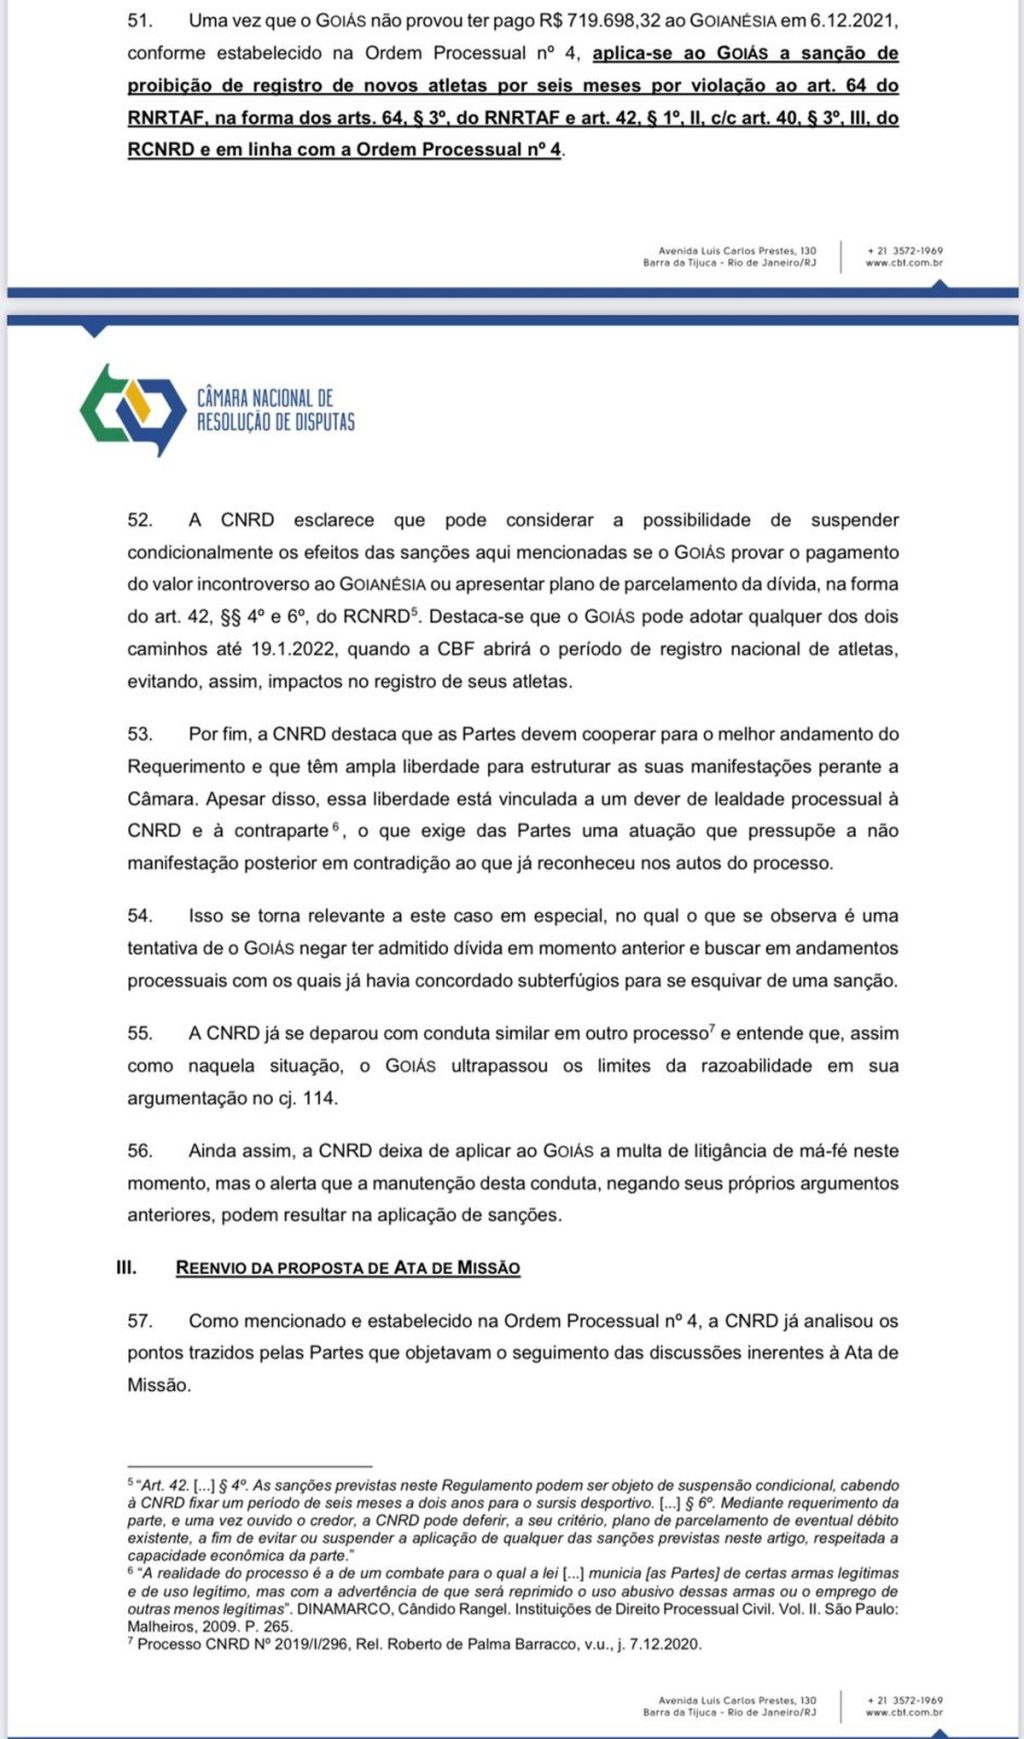 Goias banned from registering new athletes for six months due to debts arising from Michael's sale |  Goiás